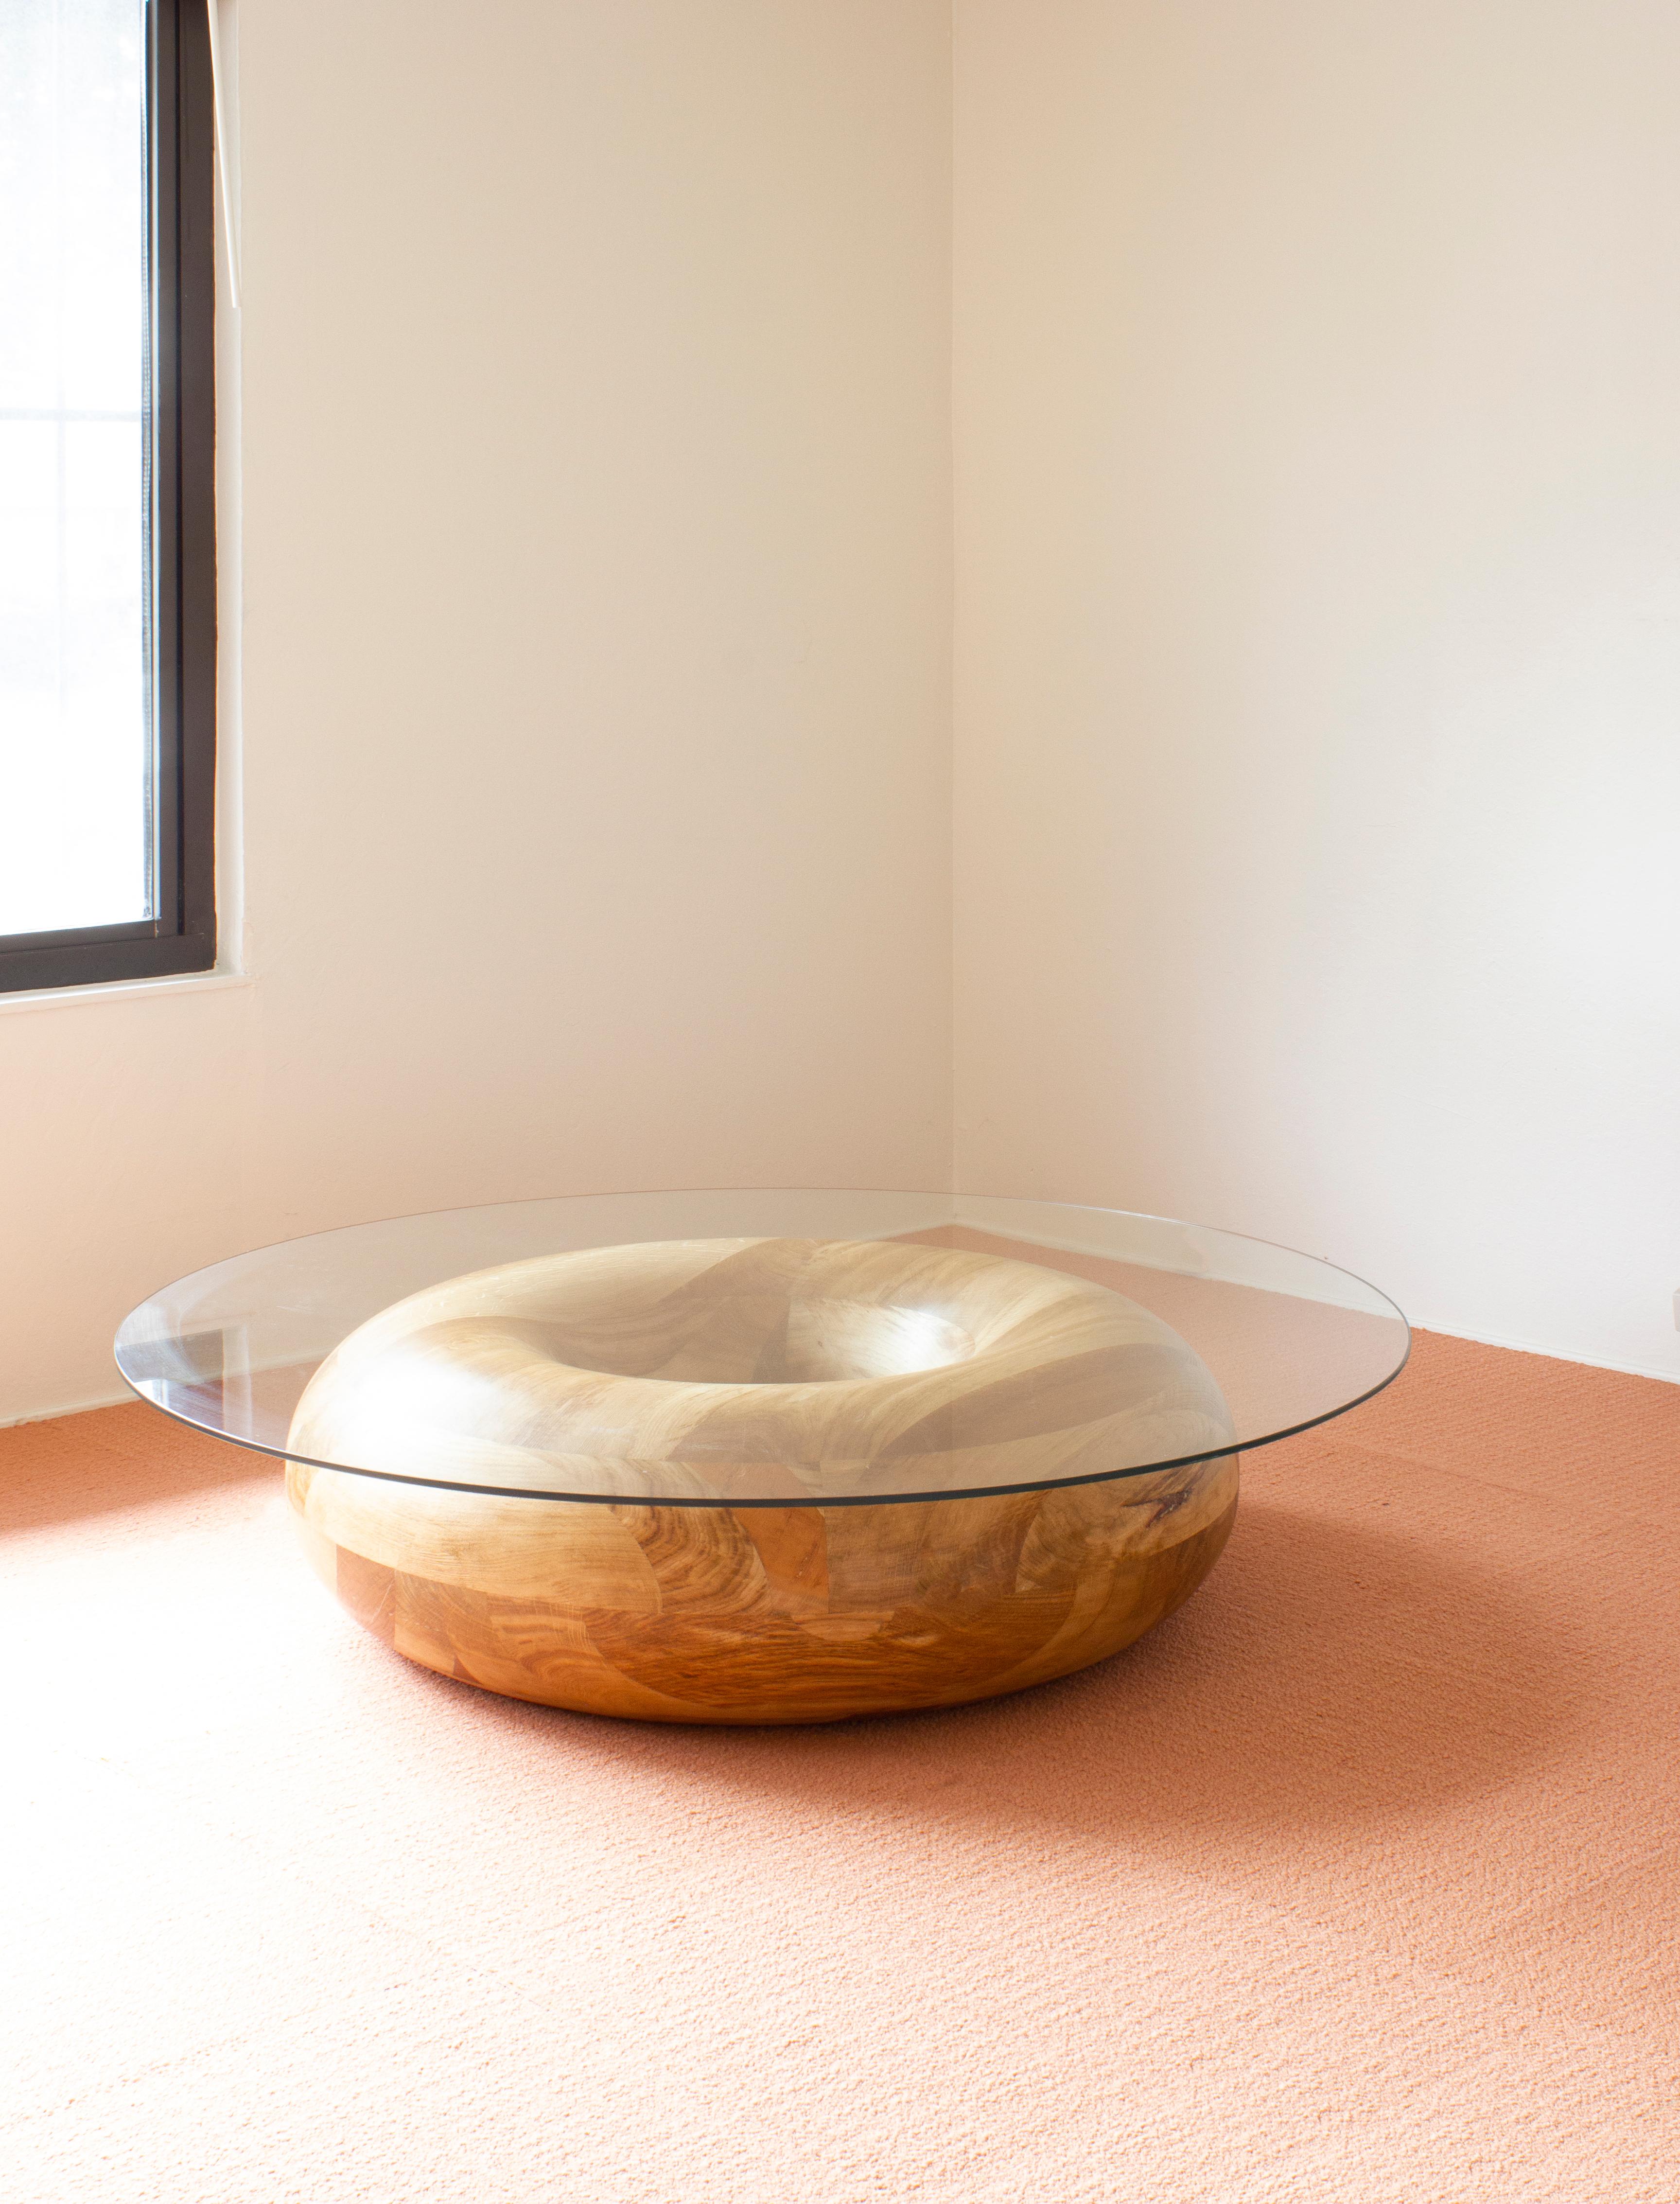 Caramel Donut coffee table by Soft-geometry
Materials: Solid Mango wood coffee table, sugar glaze, glass top
Dimensions: 48 x 48 x 12” H

True to its name, the Donut table is a dense swirl of solid wood, rich with varying grain and gradient.